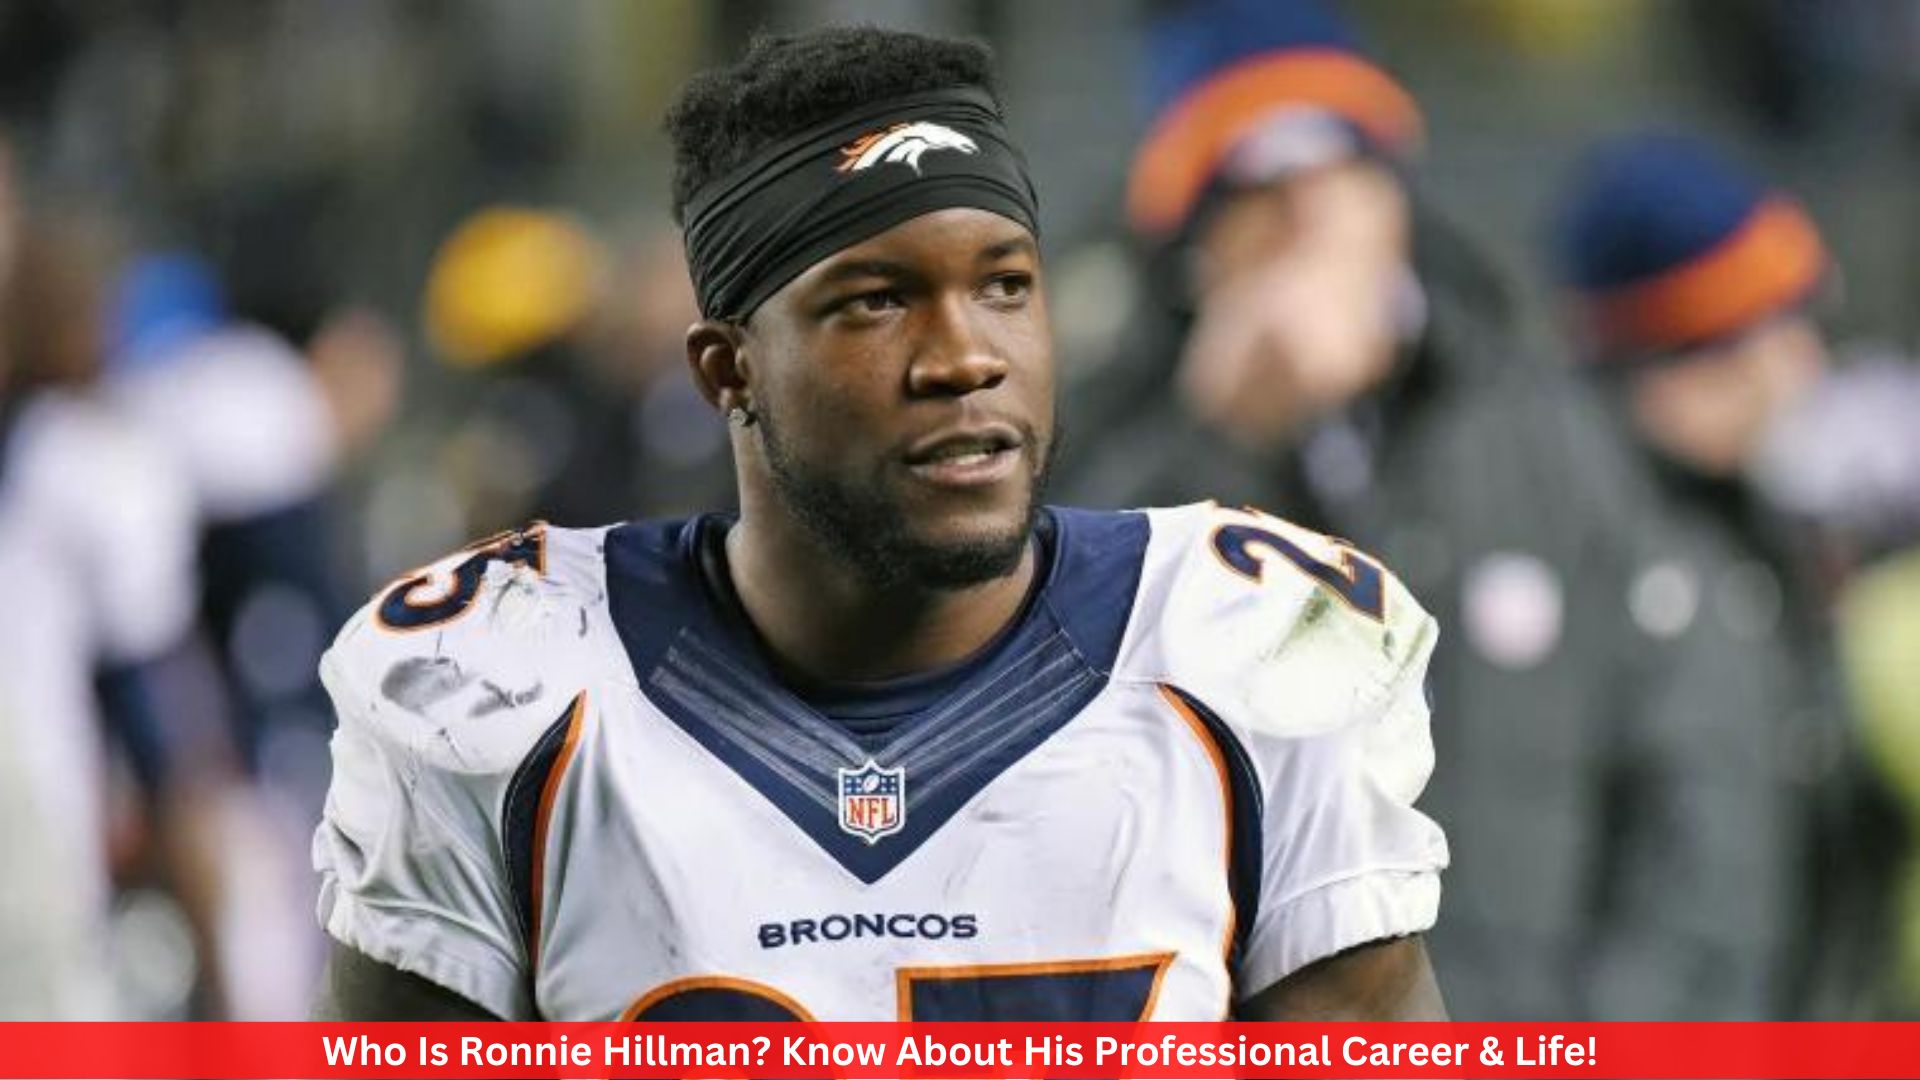 Who Is Ronnie Hillman? Know About His Professional Career & Life!